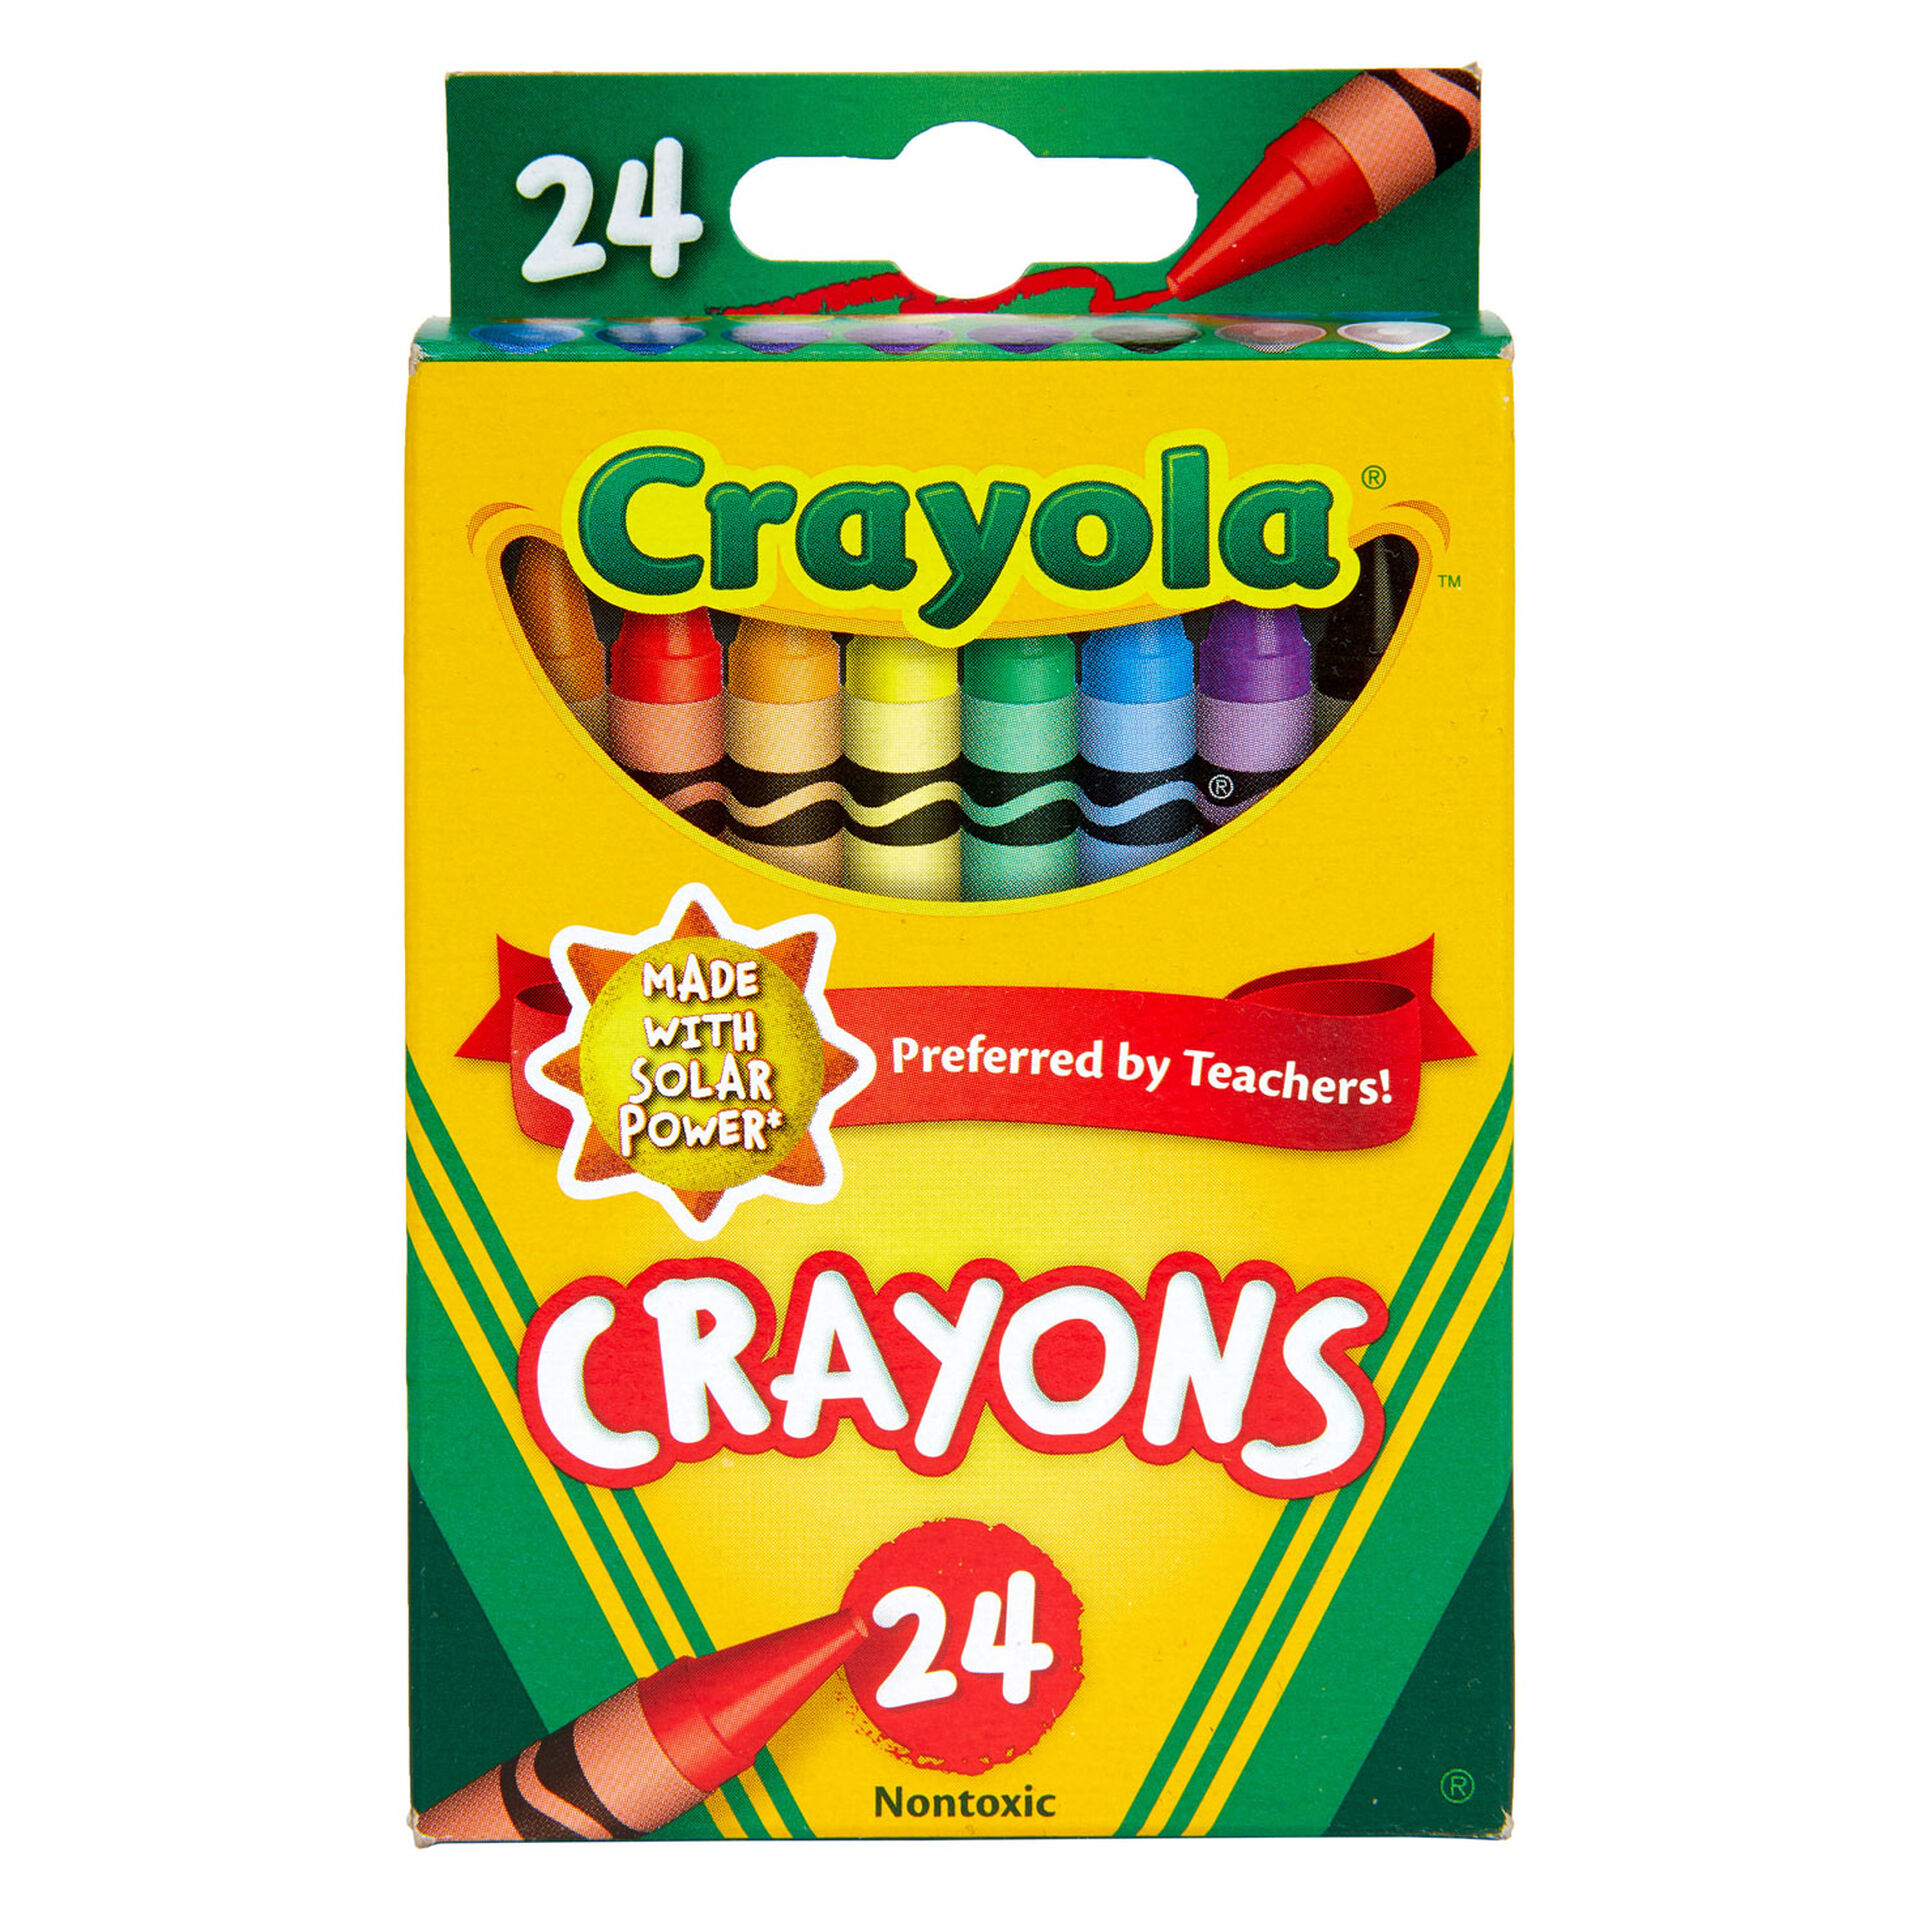 Hallmark Crown Rewards Members: Check your email for $2 off coupon + Free Shipping. Possibly free 24-Ct Crayola Crayons (YMMV)